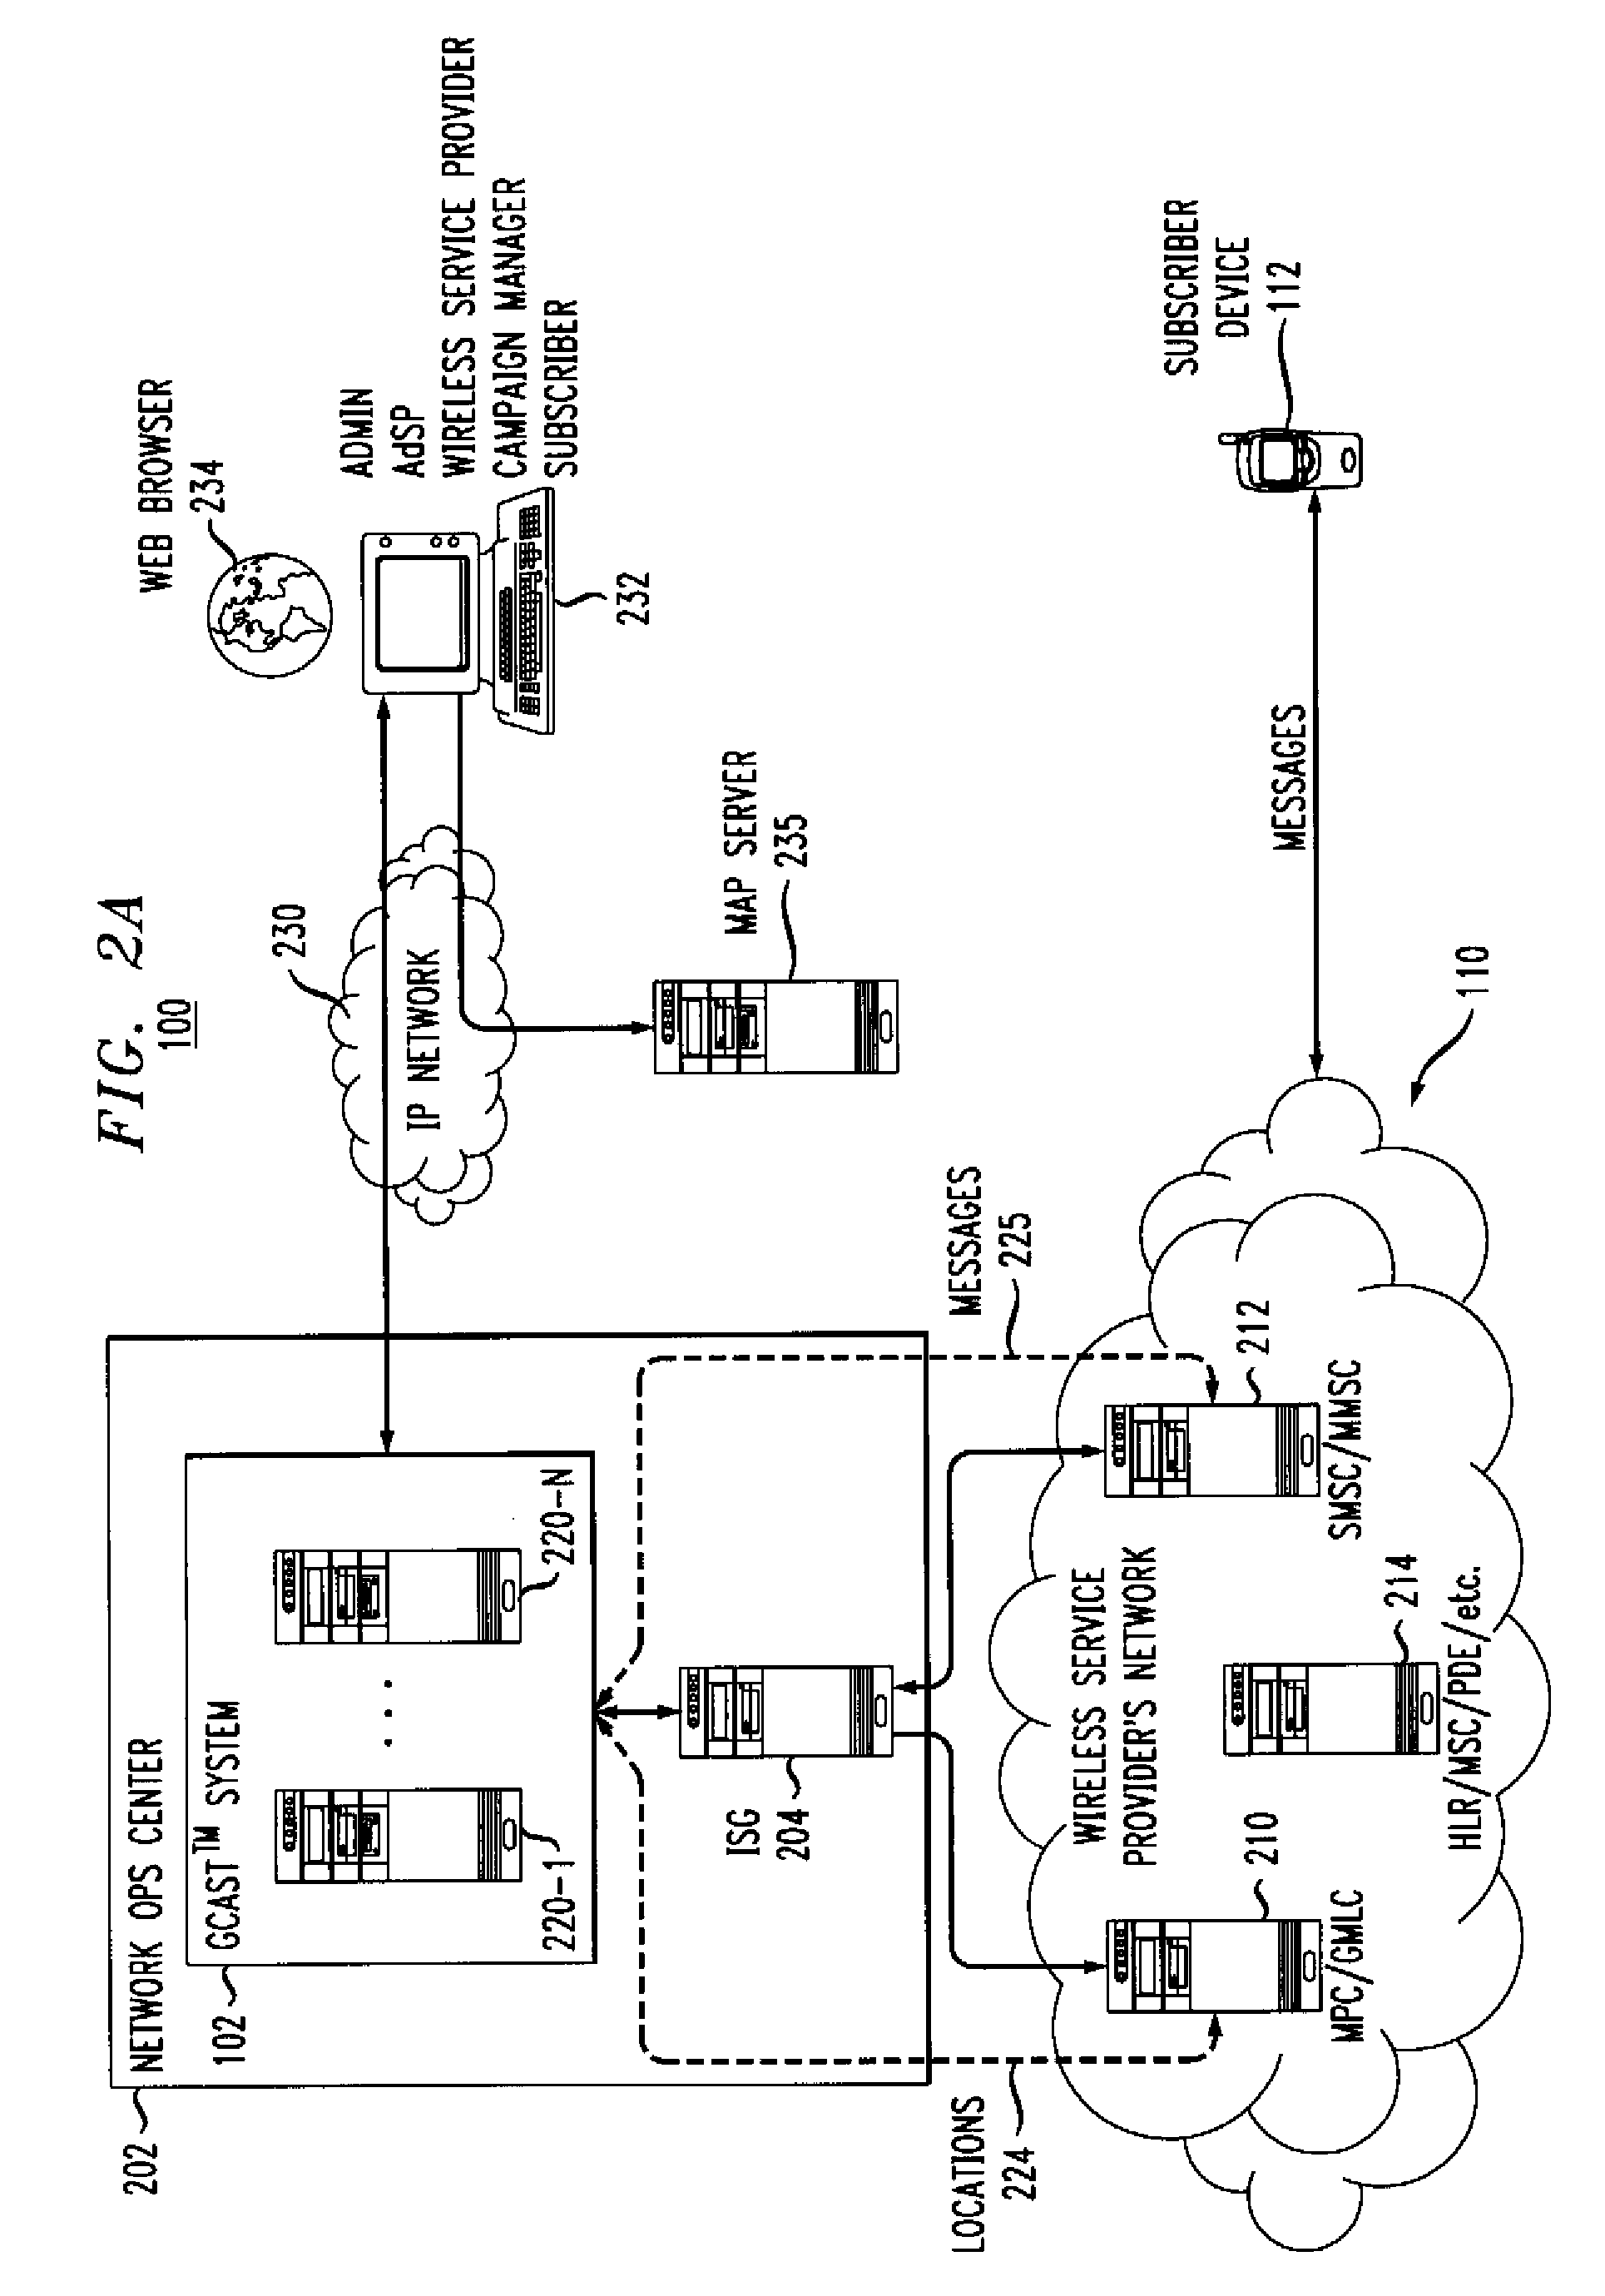 Methods and apparatus for providing location-based services in a wireless communication system